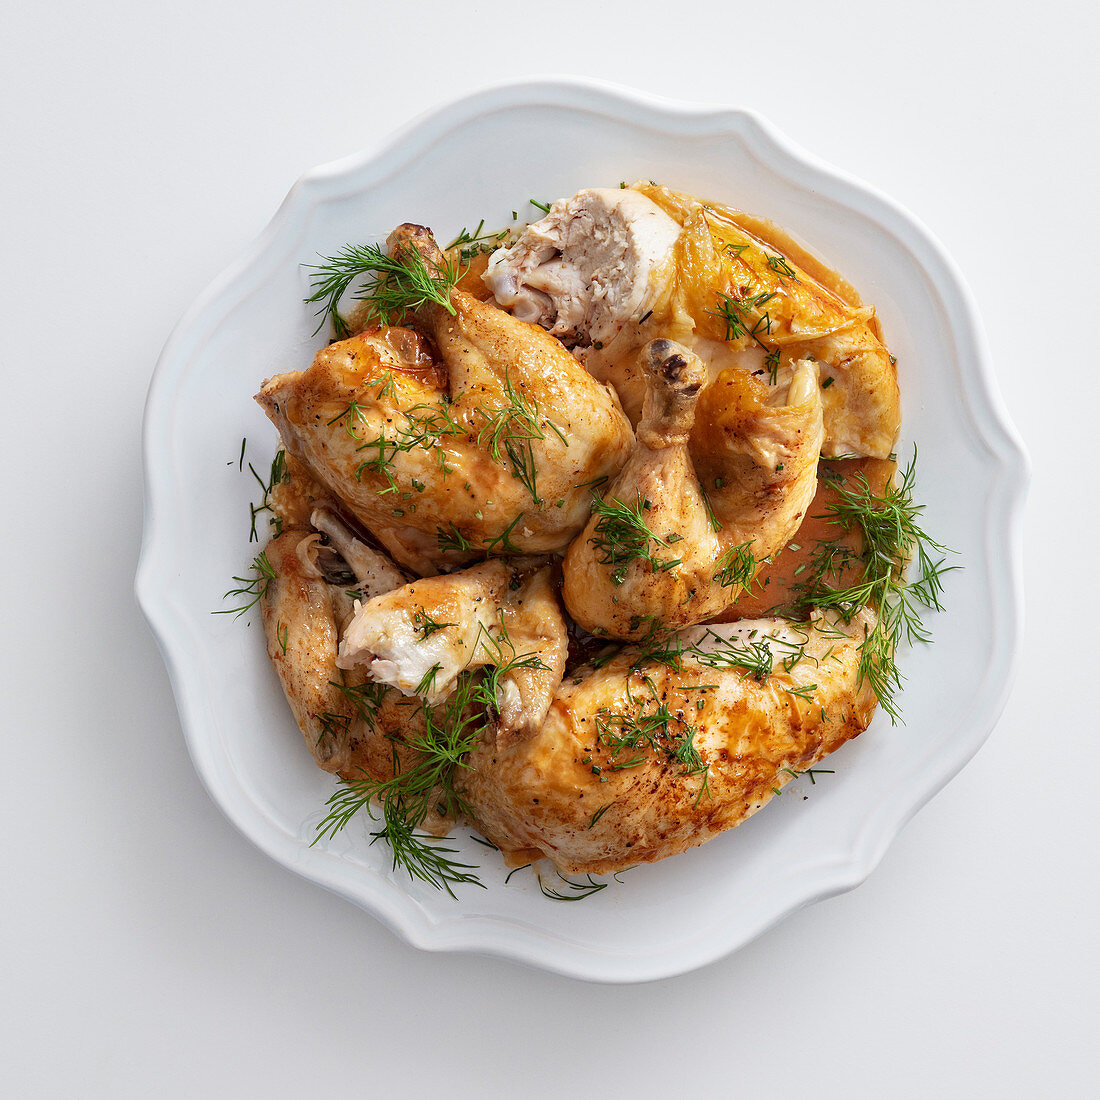 Chicken with bacon, rosemary and dill